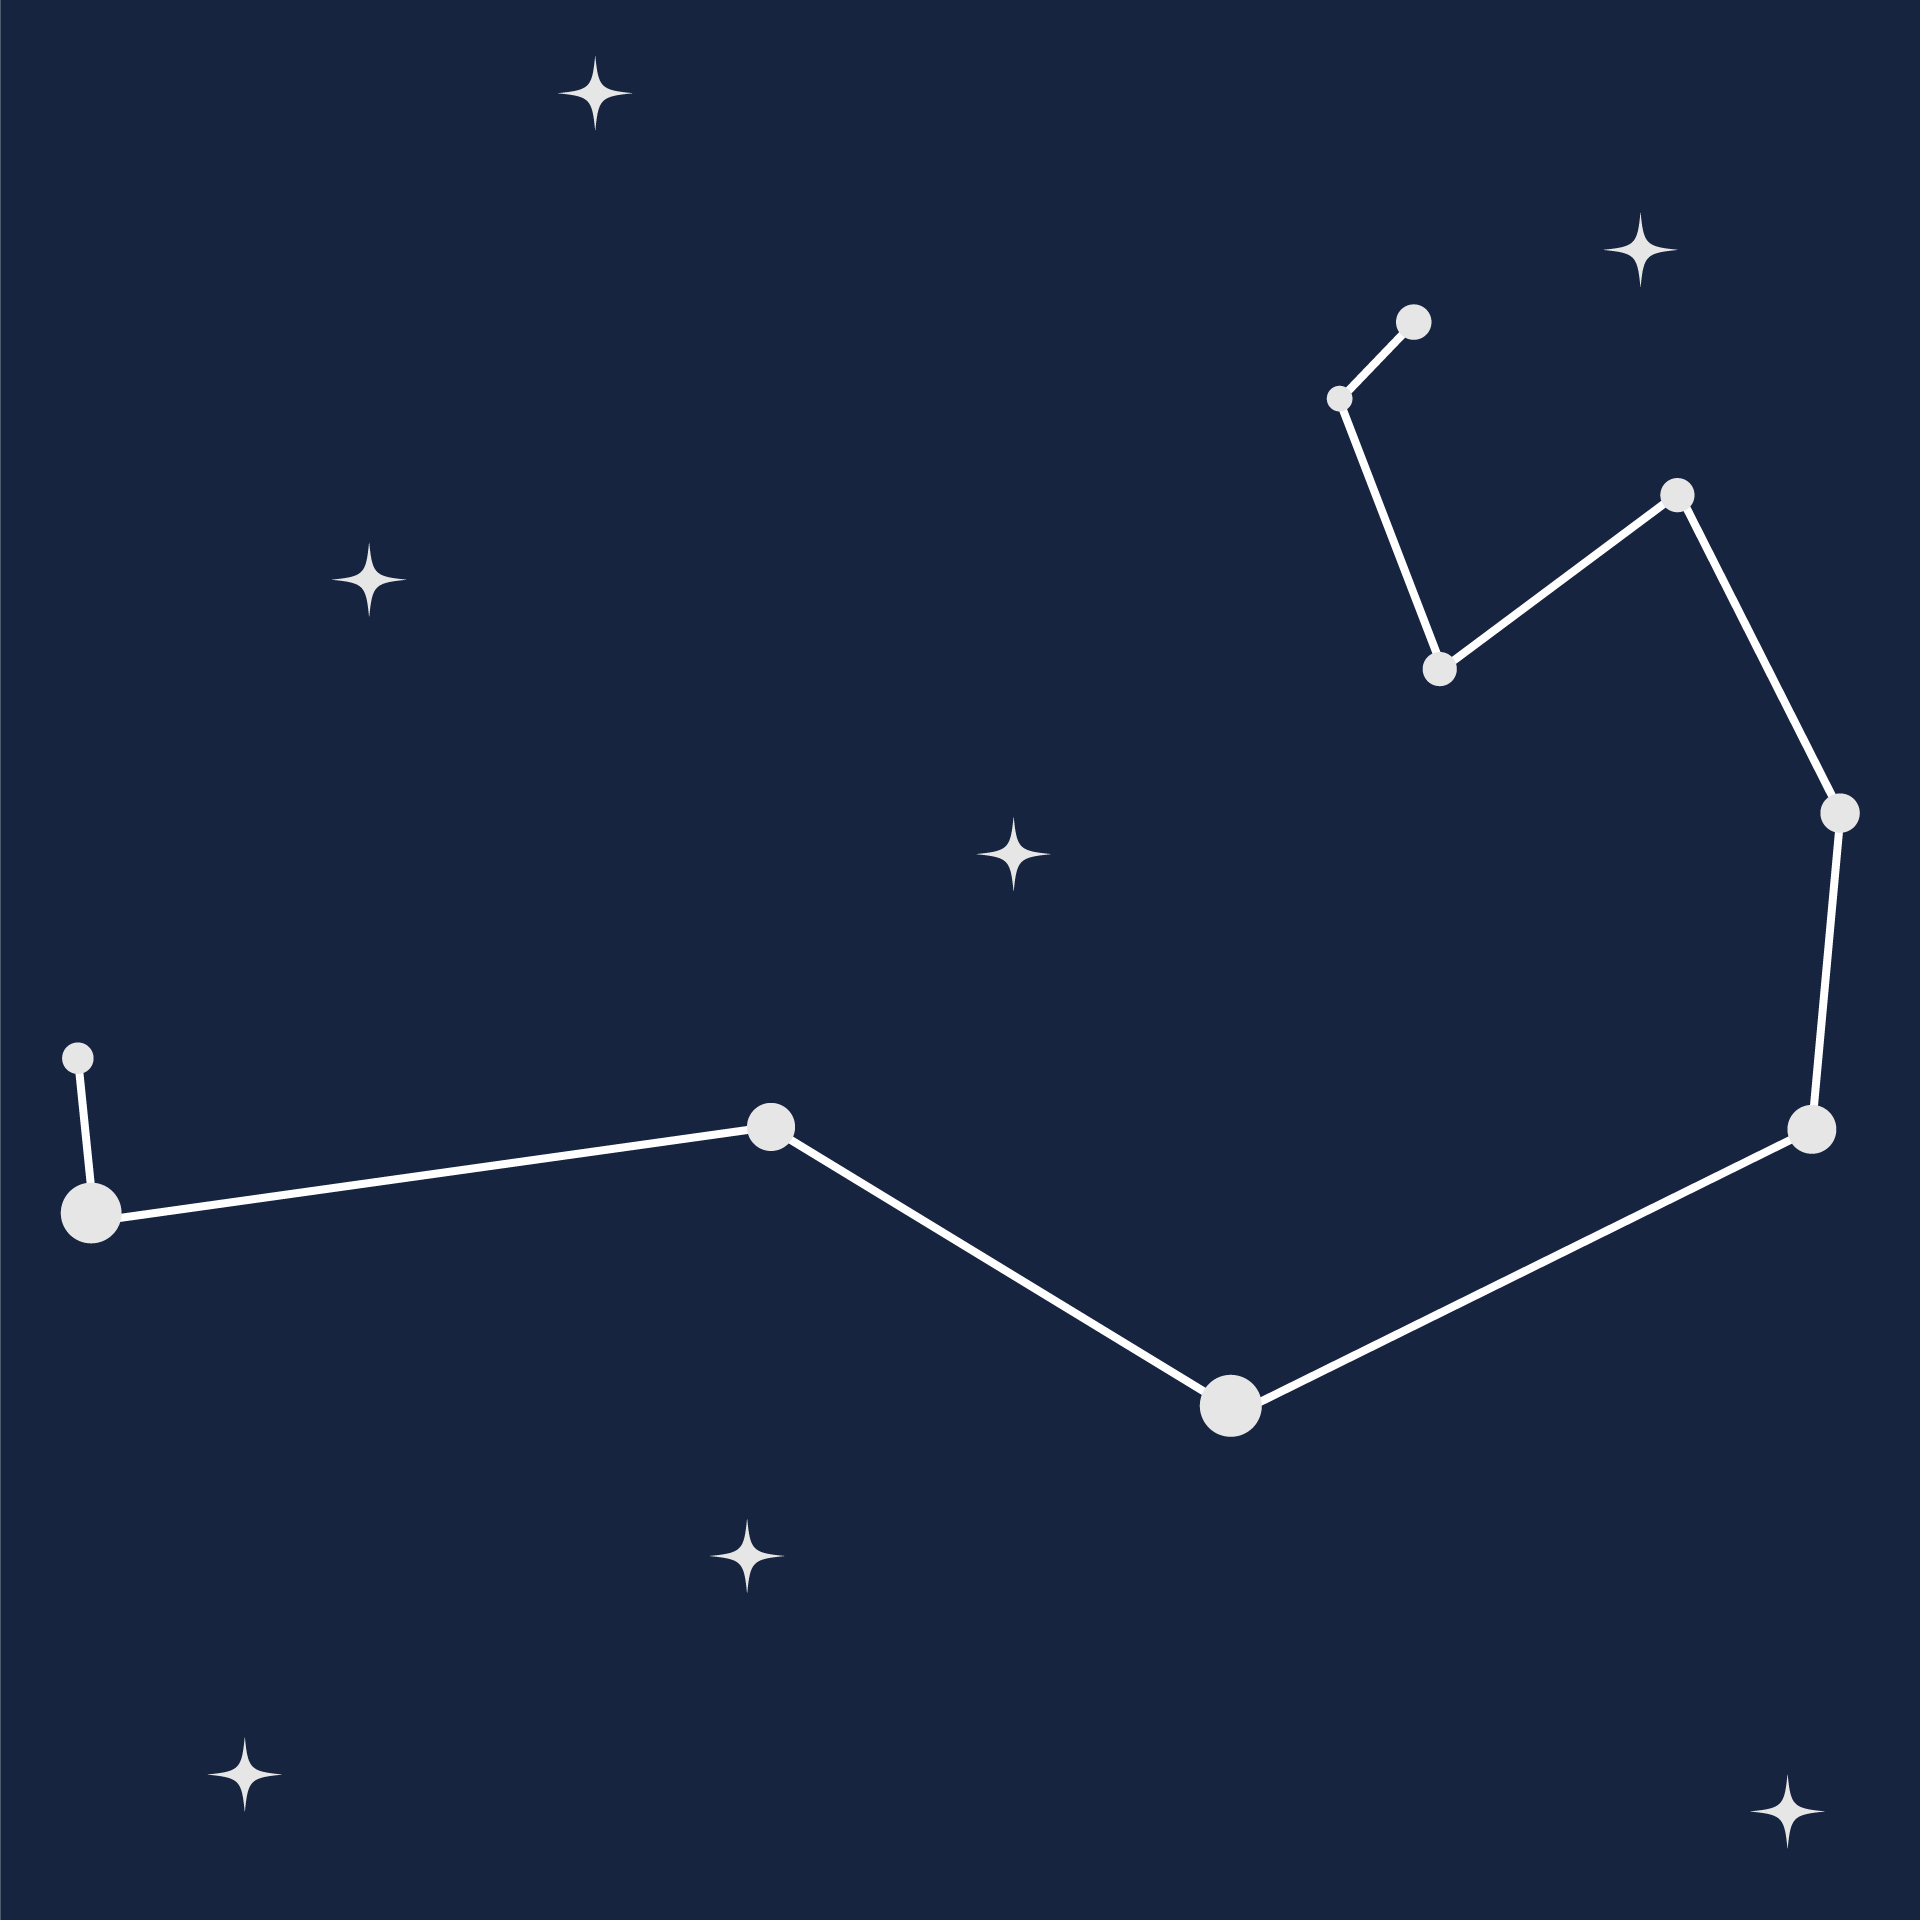 Illustration of the Seven Sisters constellation